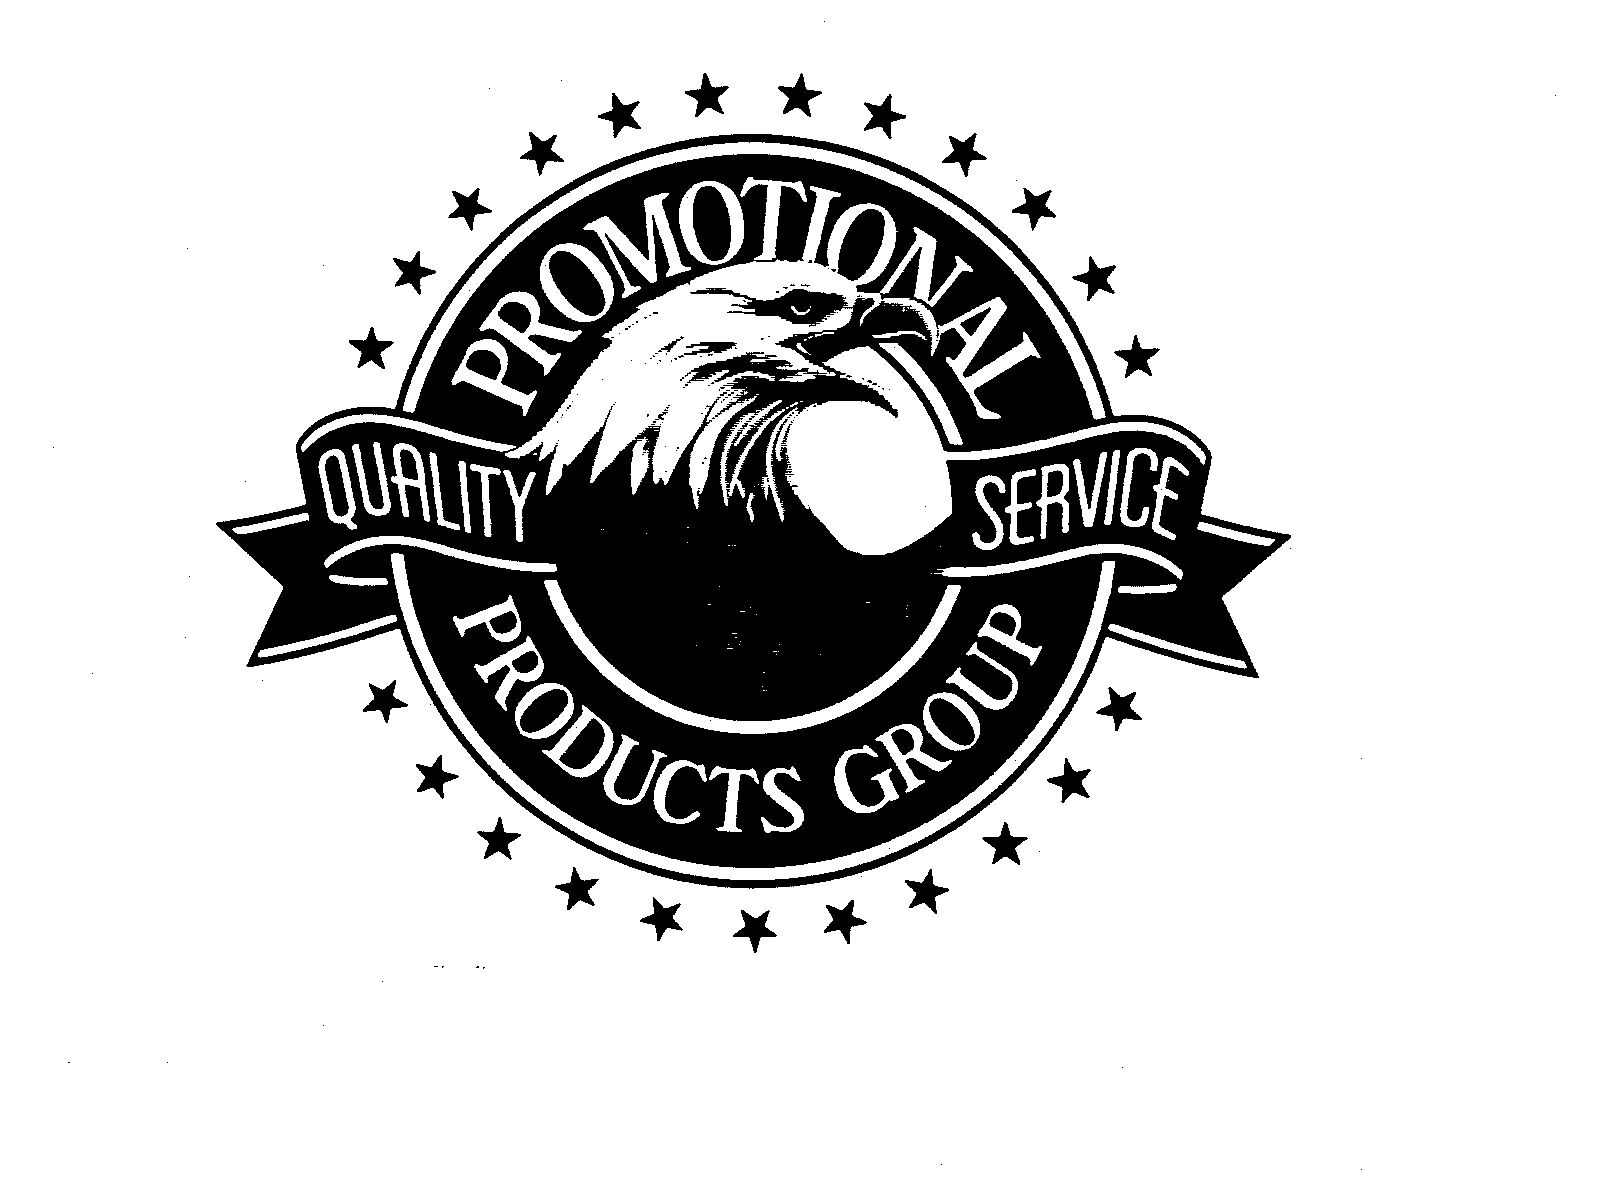  PROMOTIONAL PRODUCTS GROUP QUALITY SERVICE